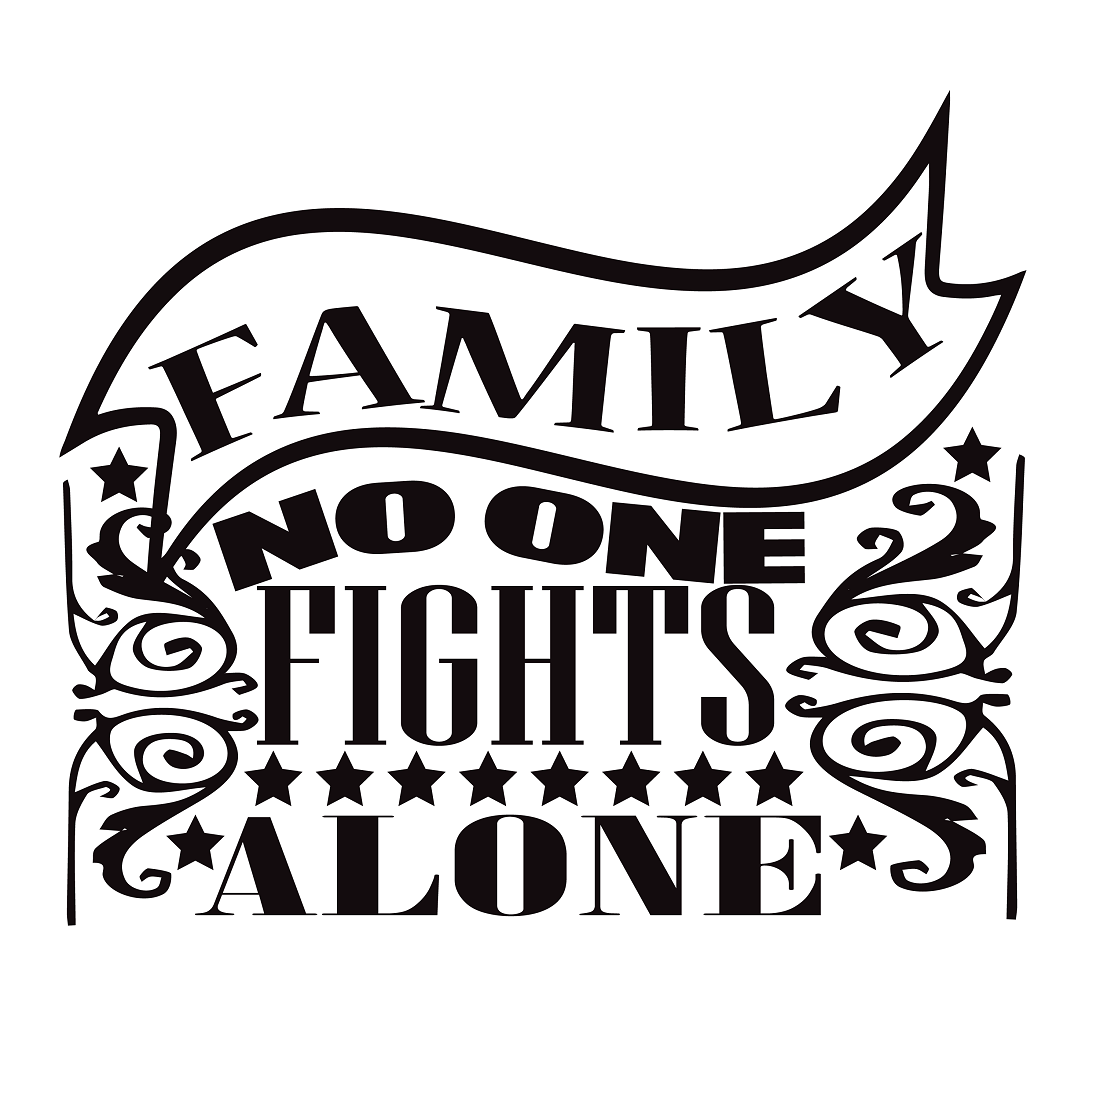 In This Family No One Fights Alone preview image.